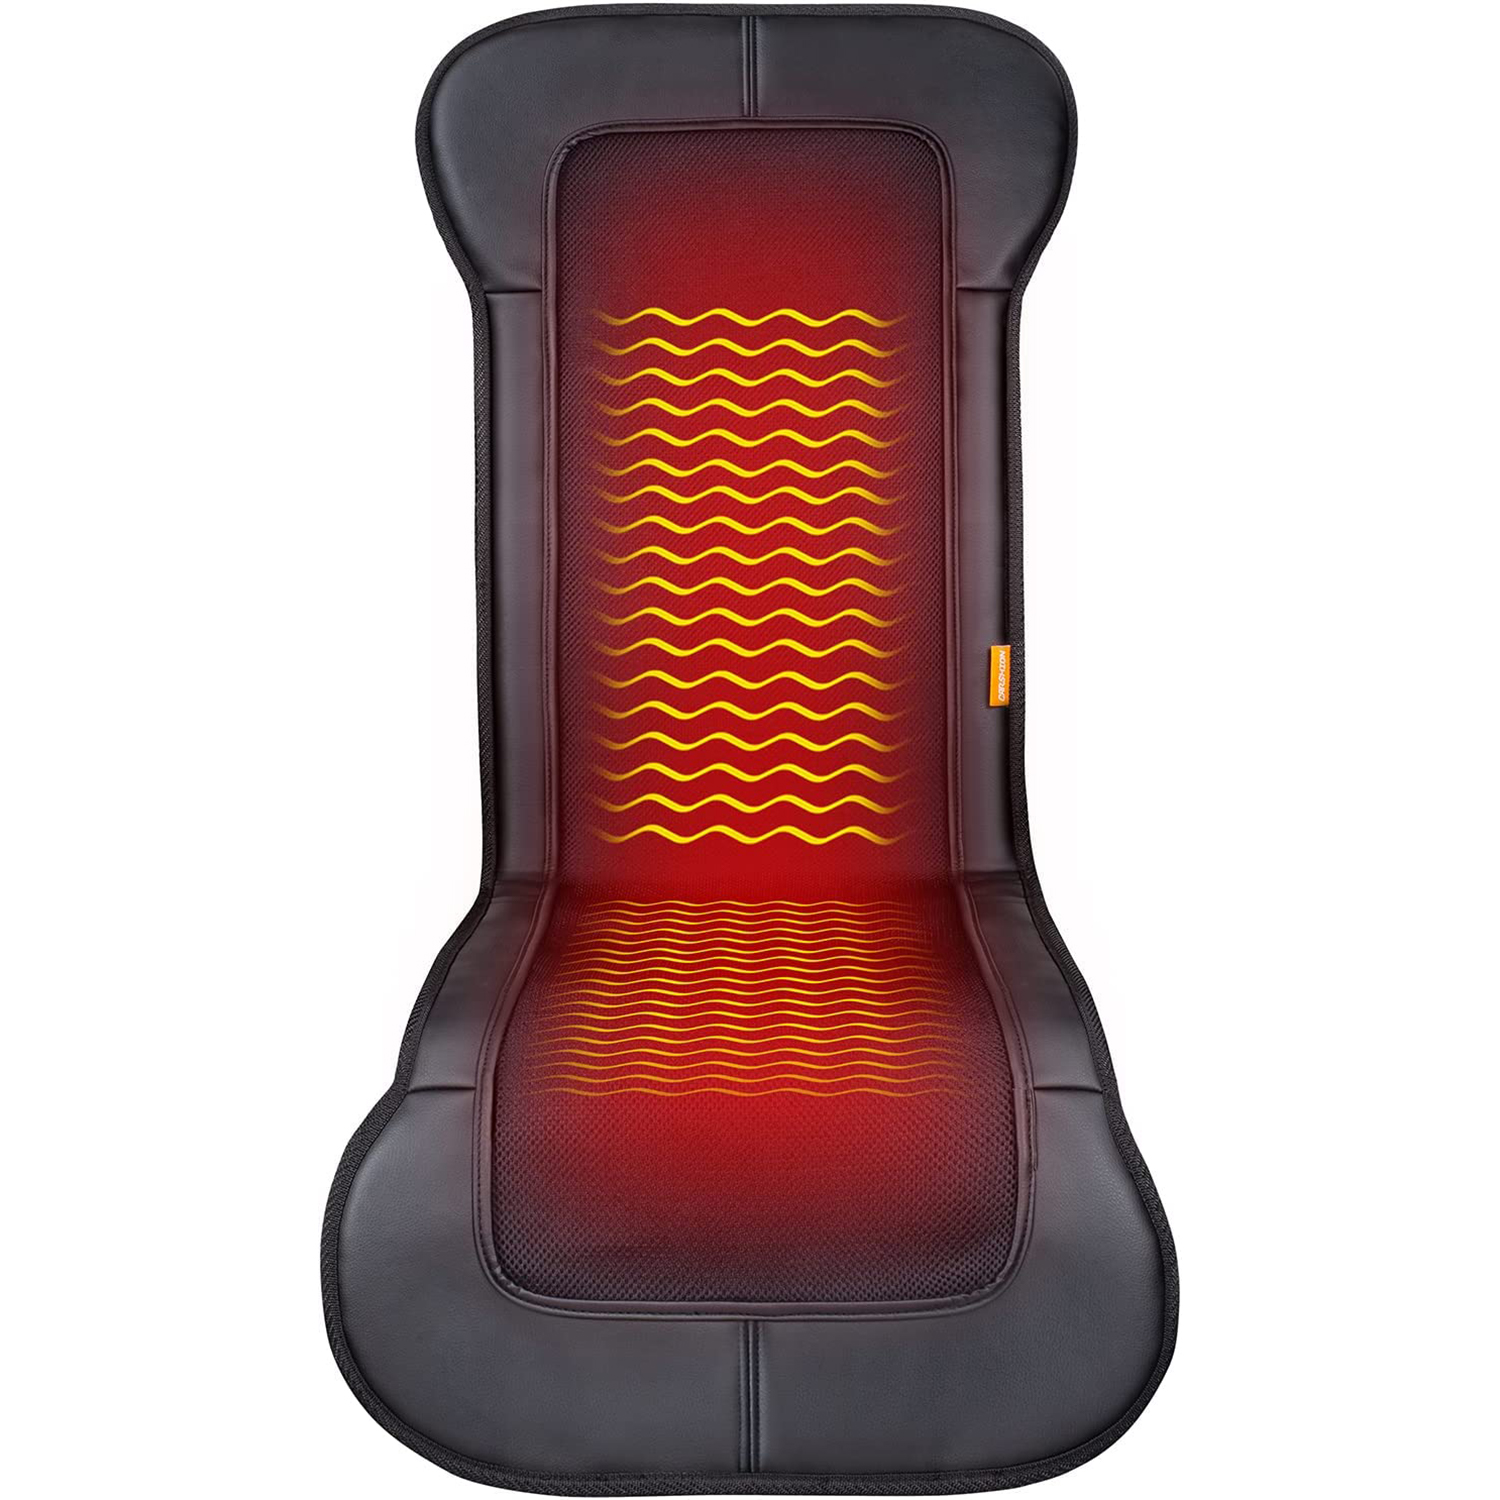 Heated Seat Cover with Fast-Heating Technology